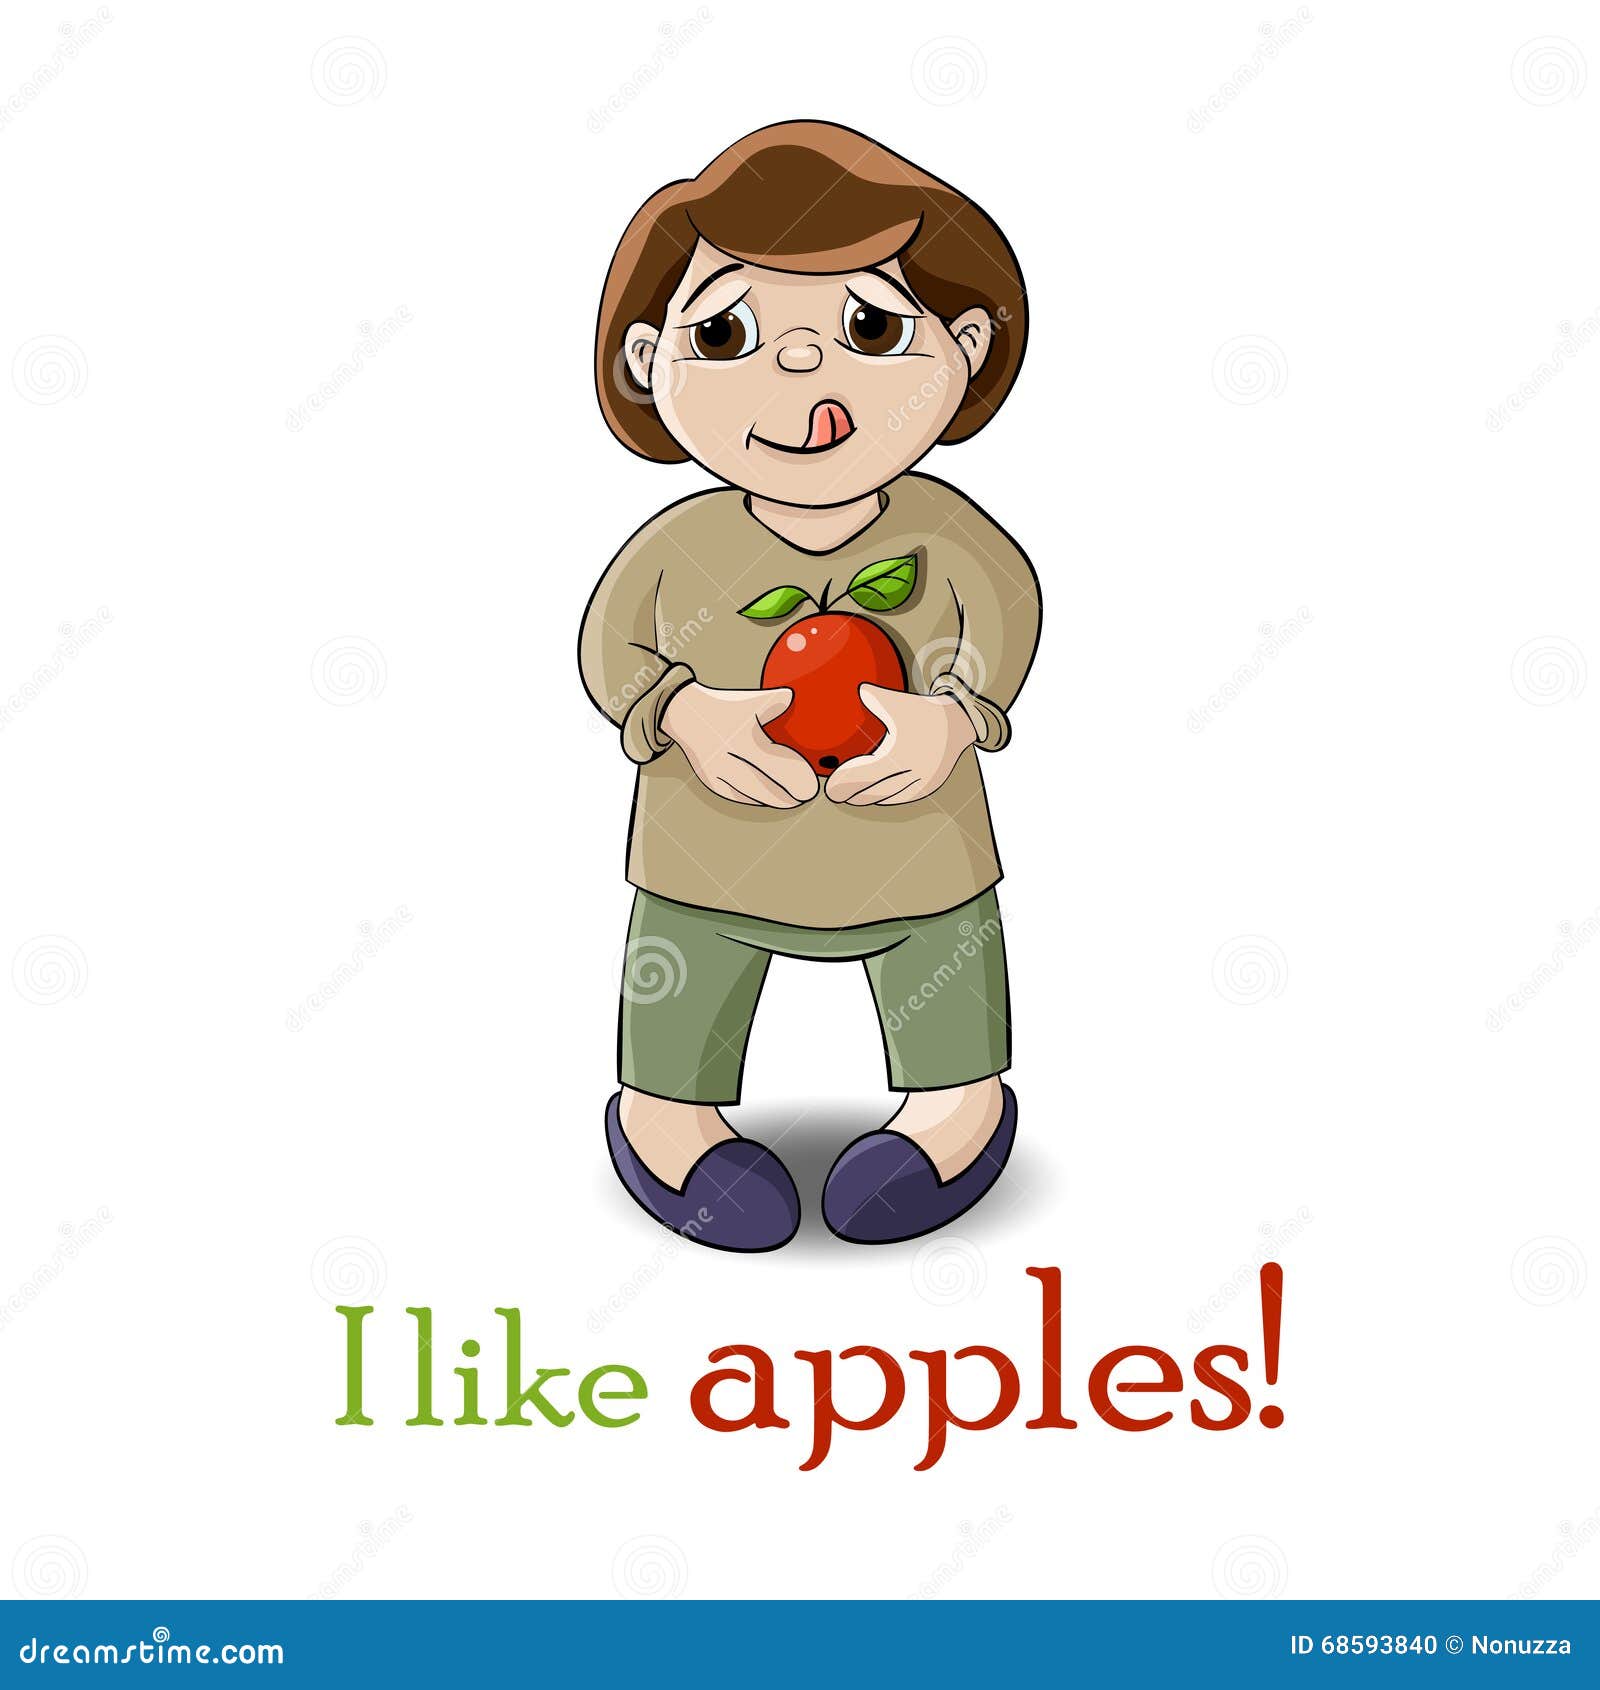 He an apple and